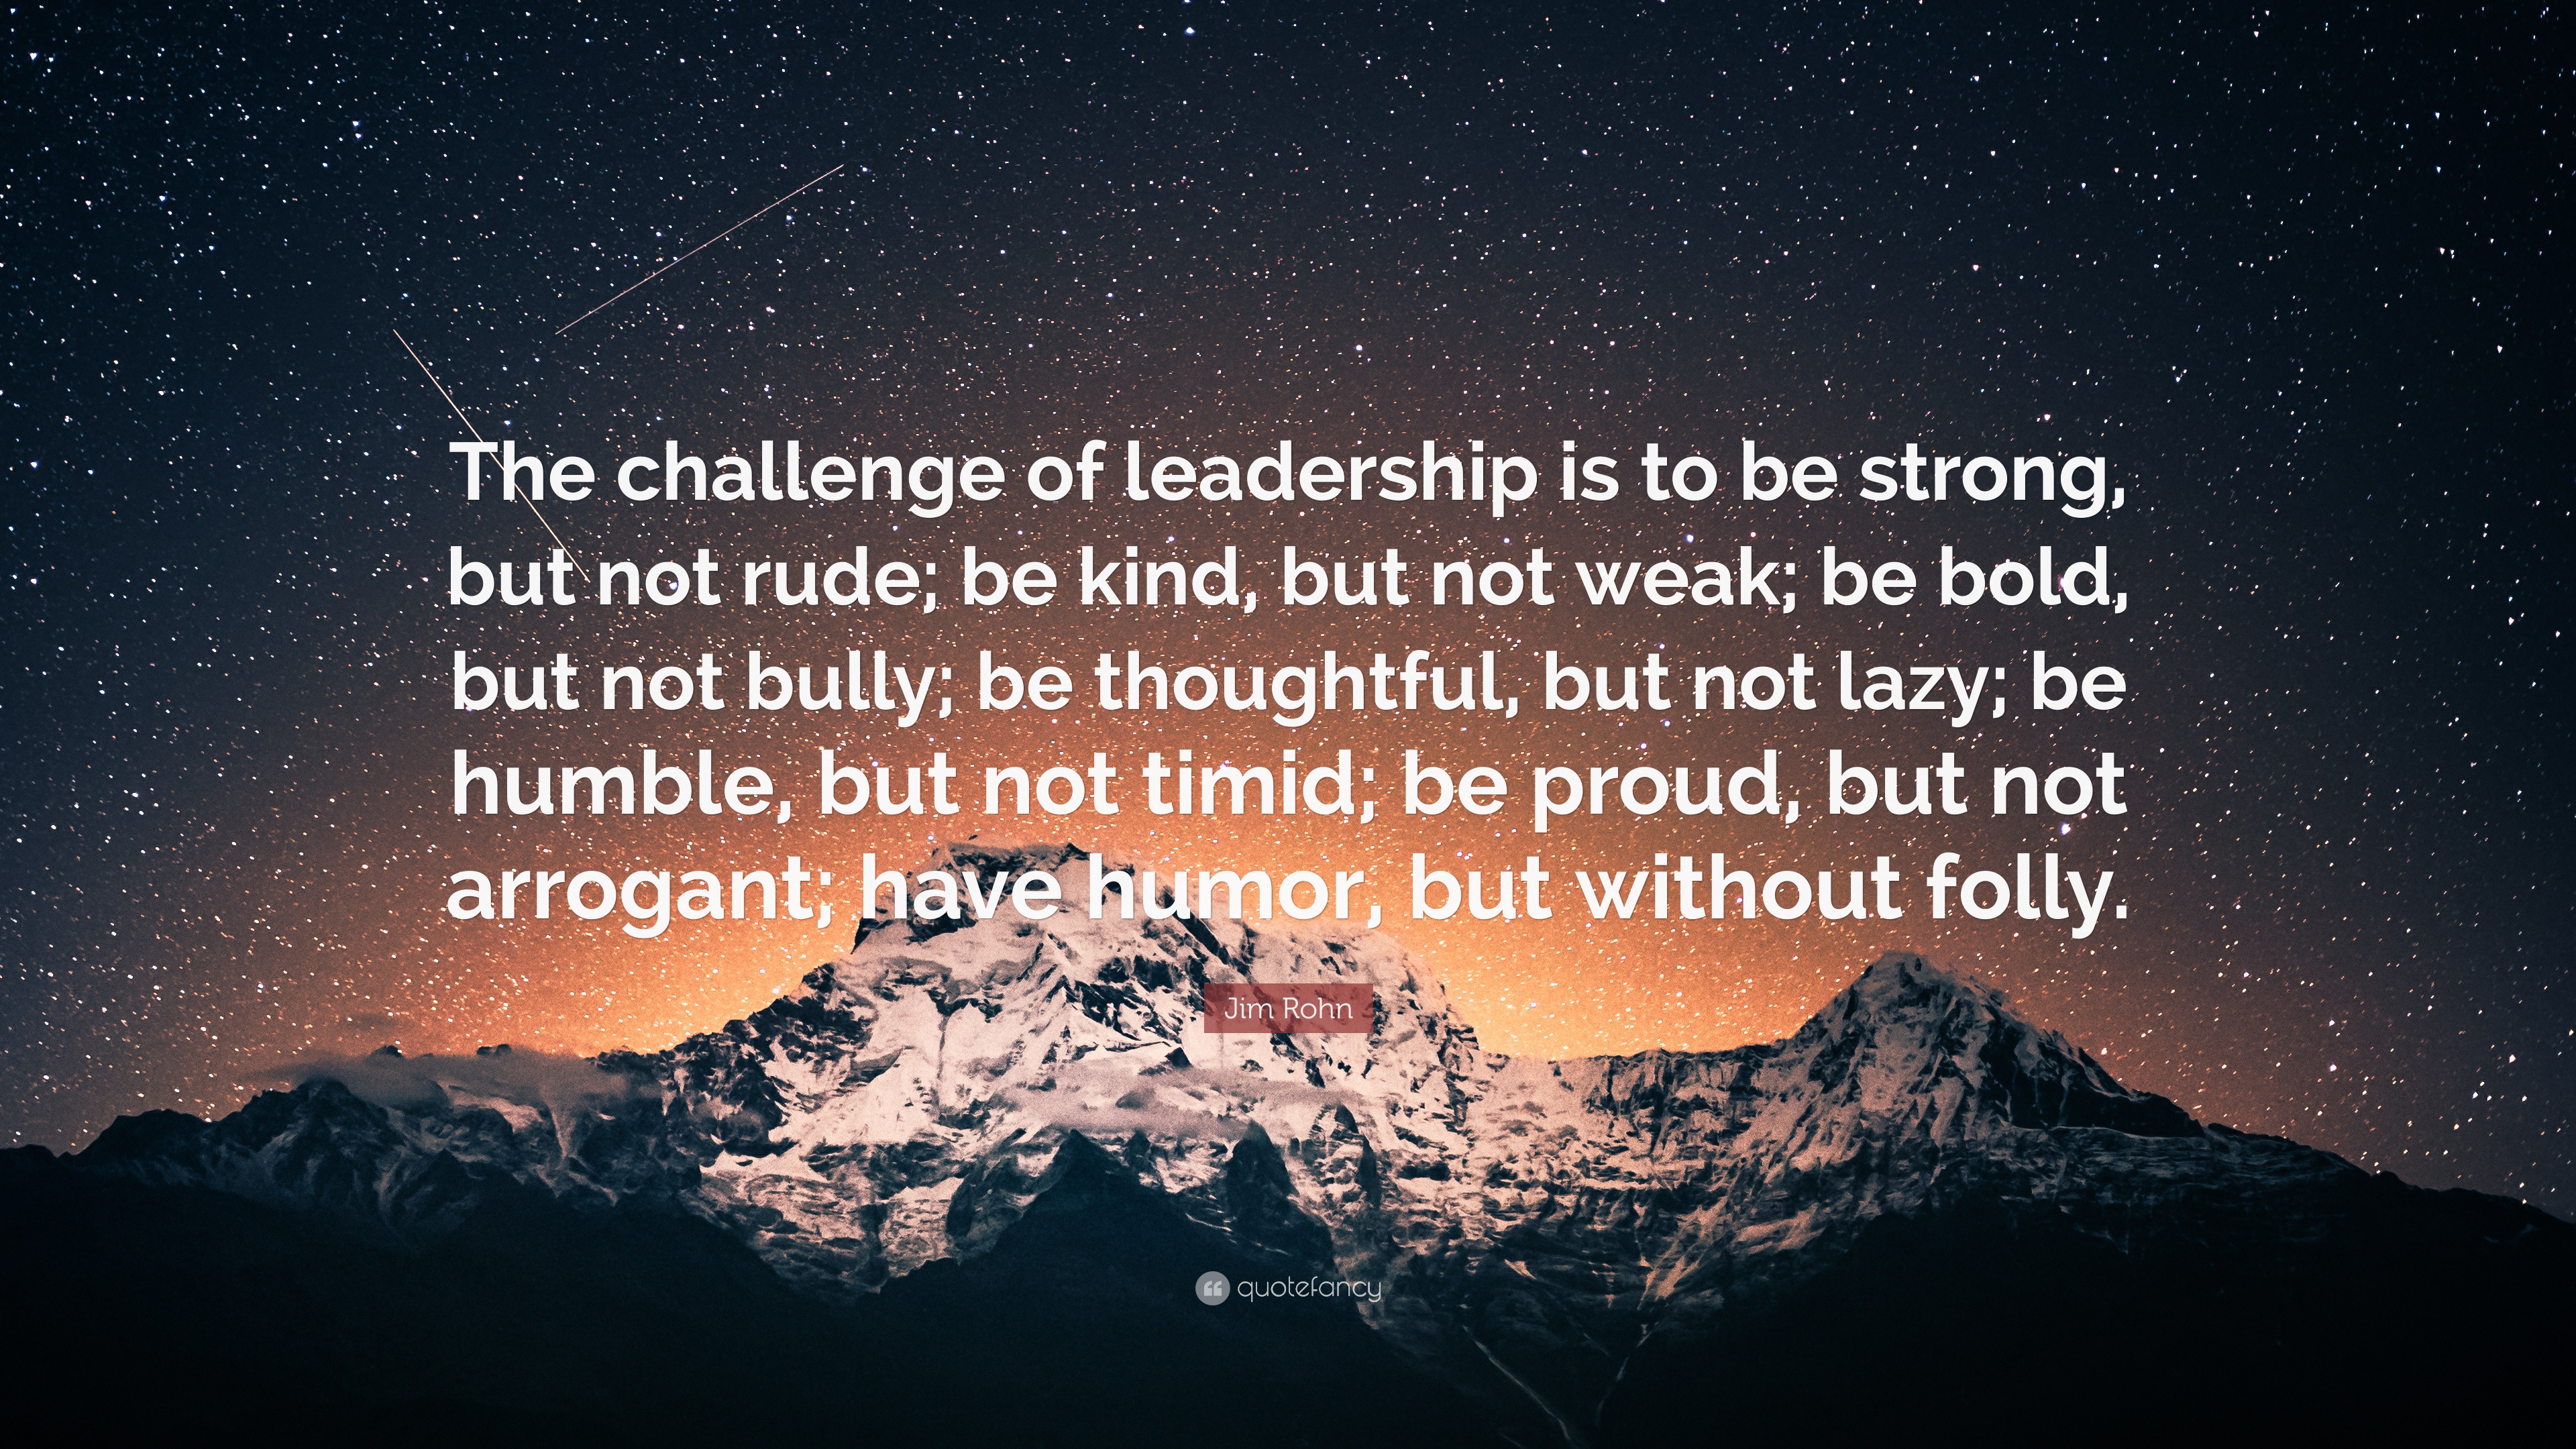 Jim Rohn Quote: “The challenge of leadership is to be strong, but not